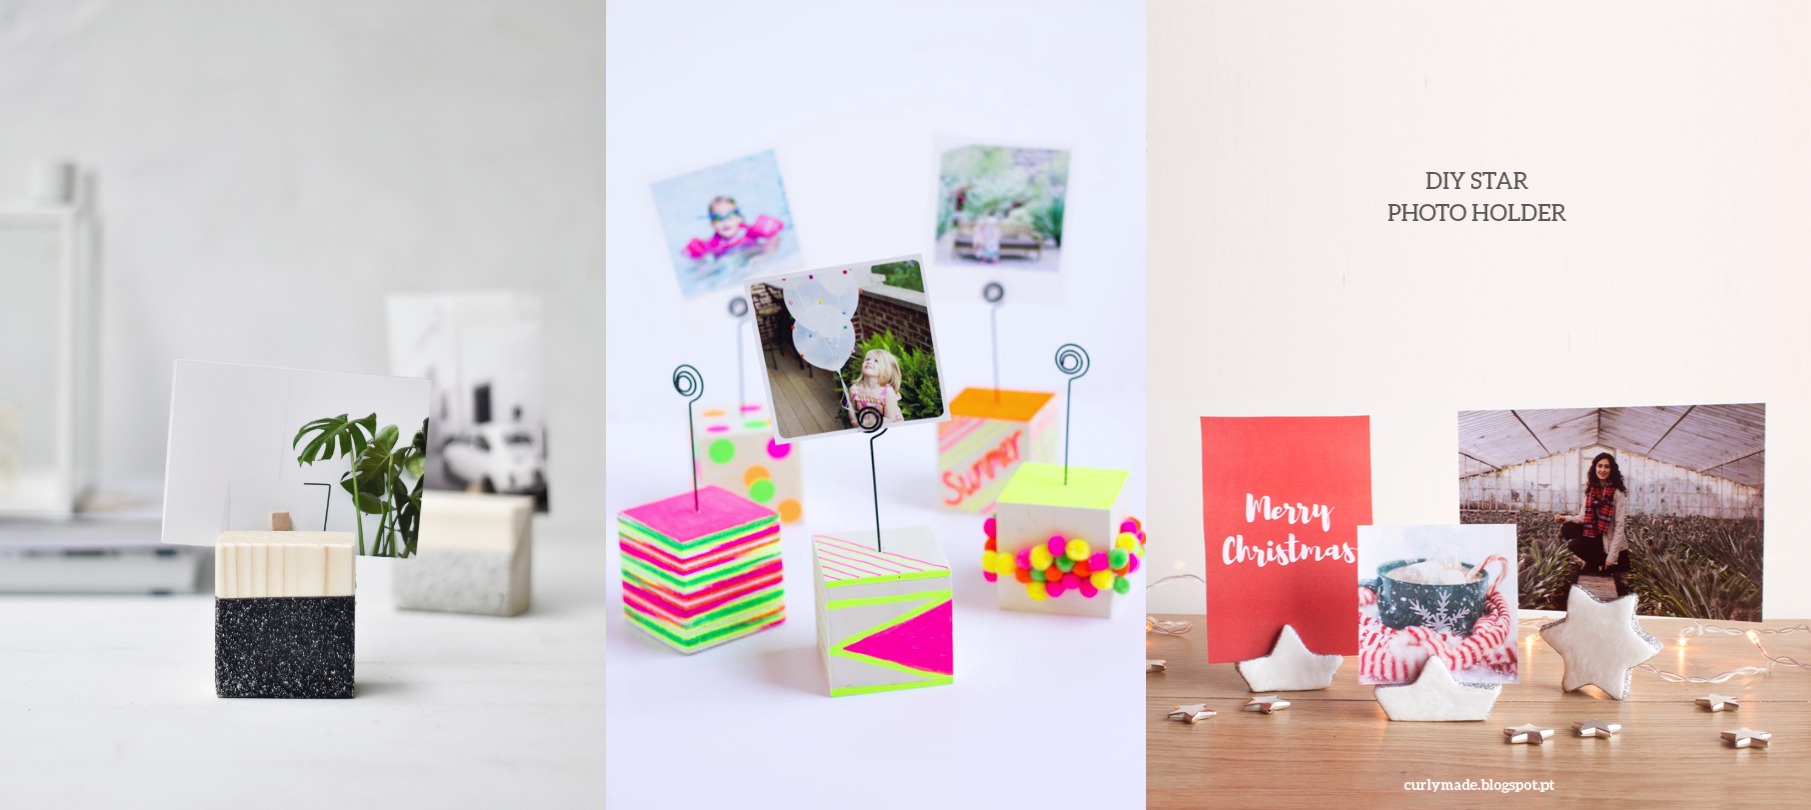 10 DIY Photo Holders Ideas To Impress Your Loved One